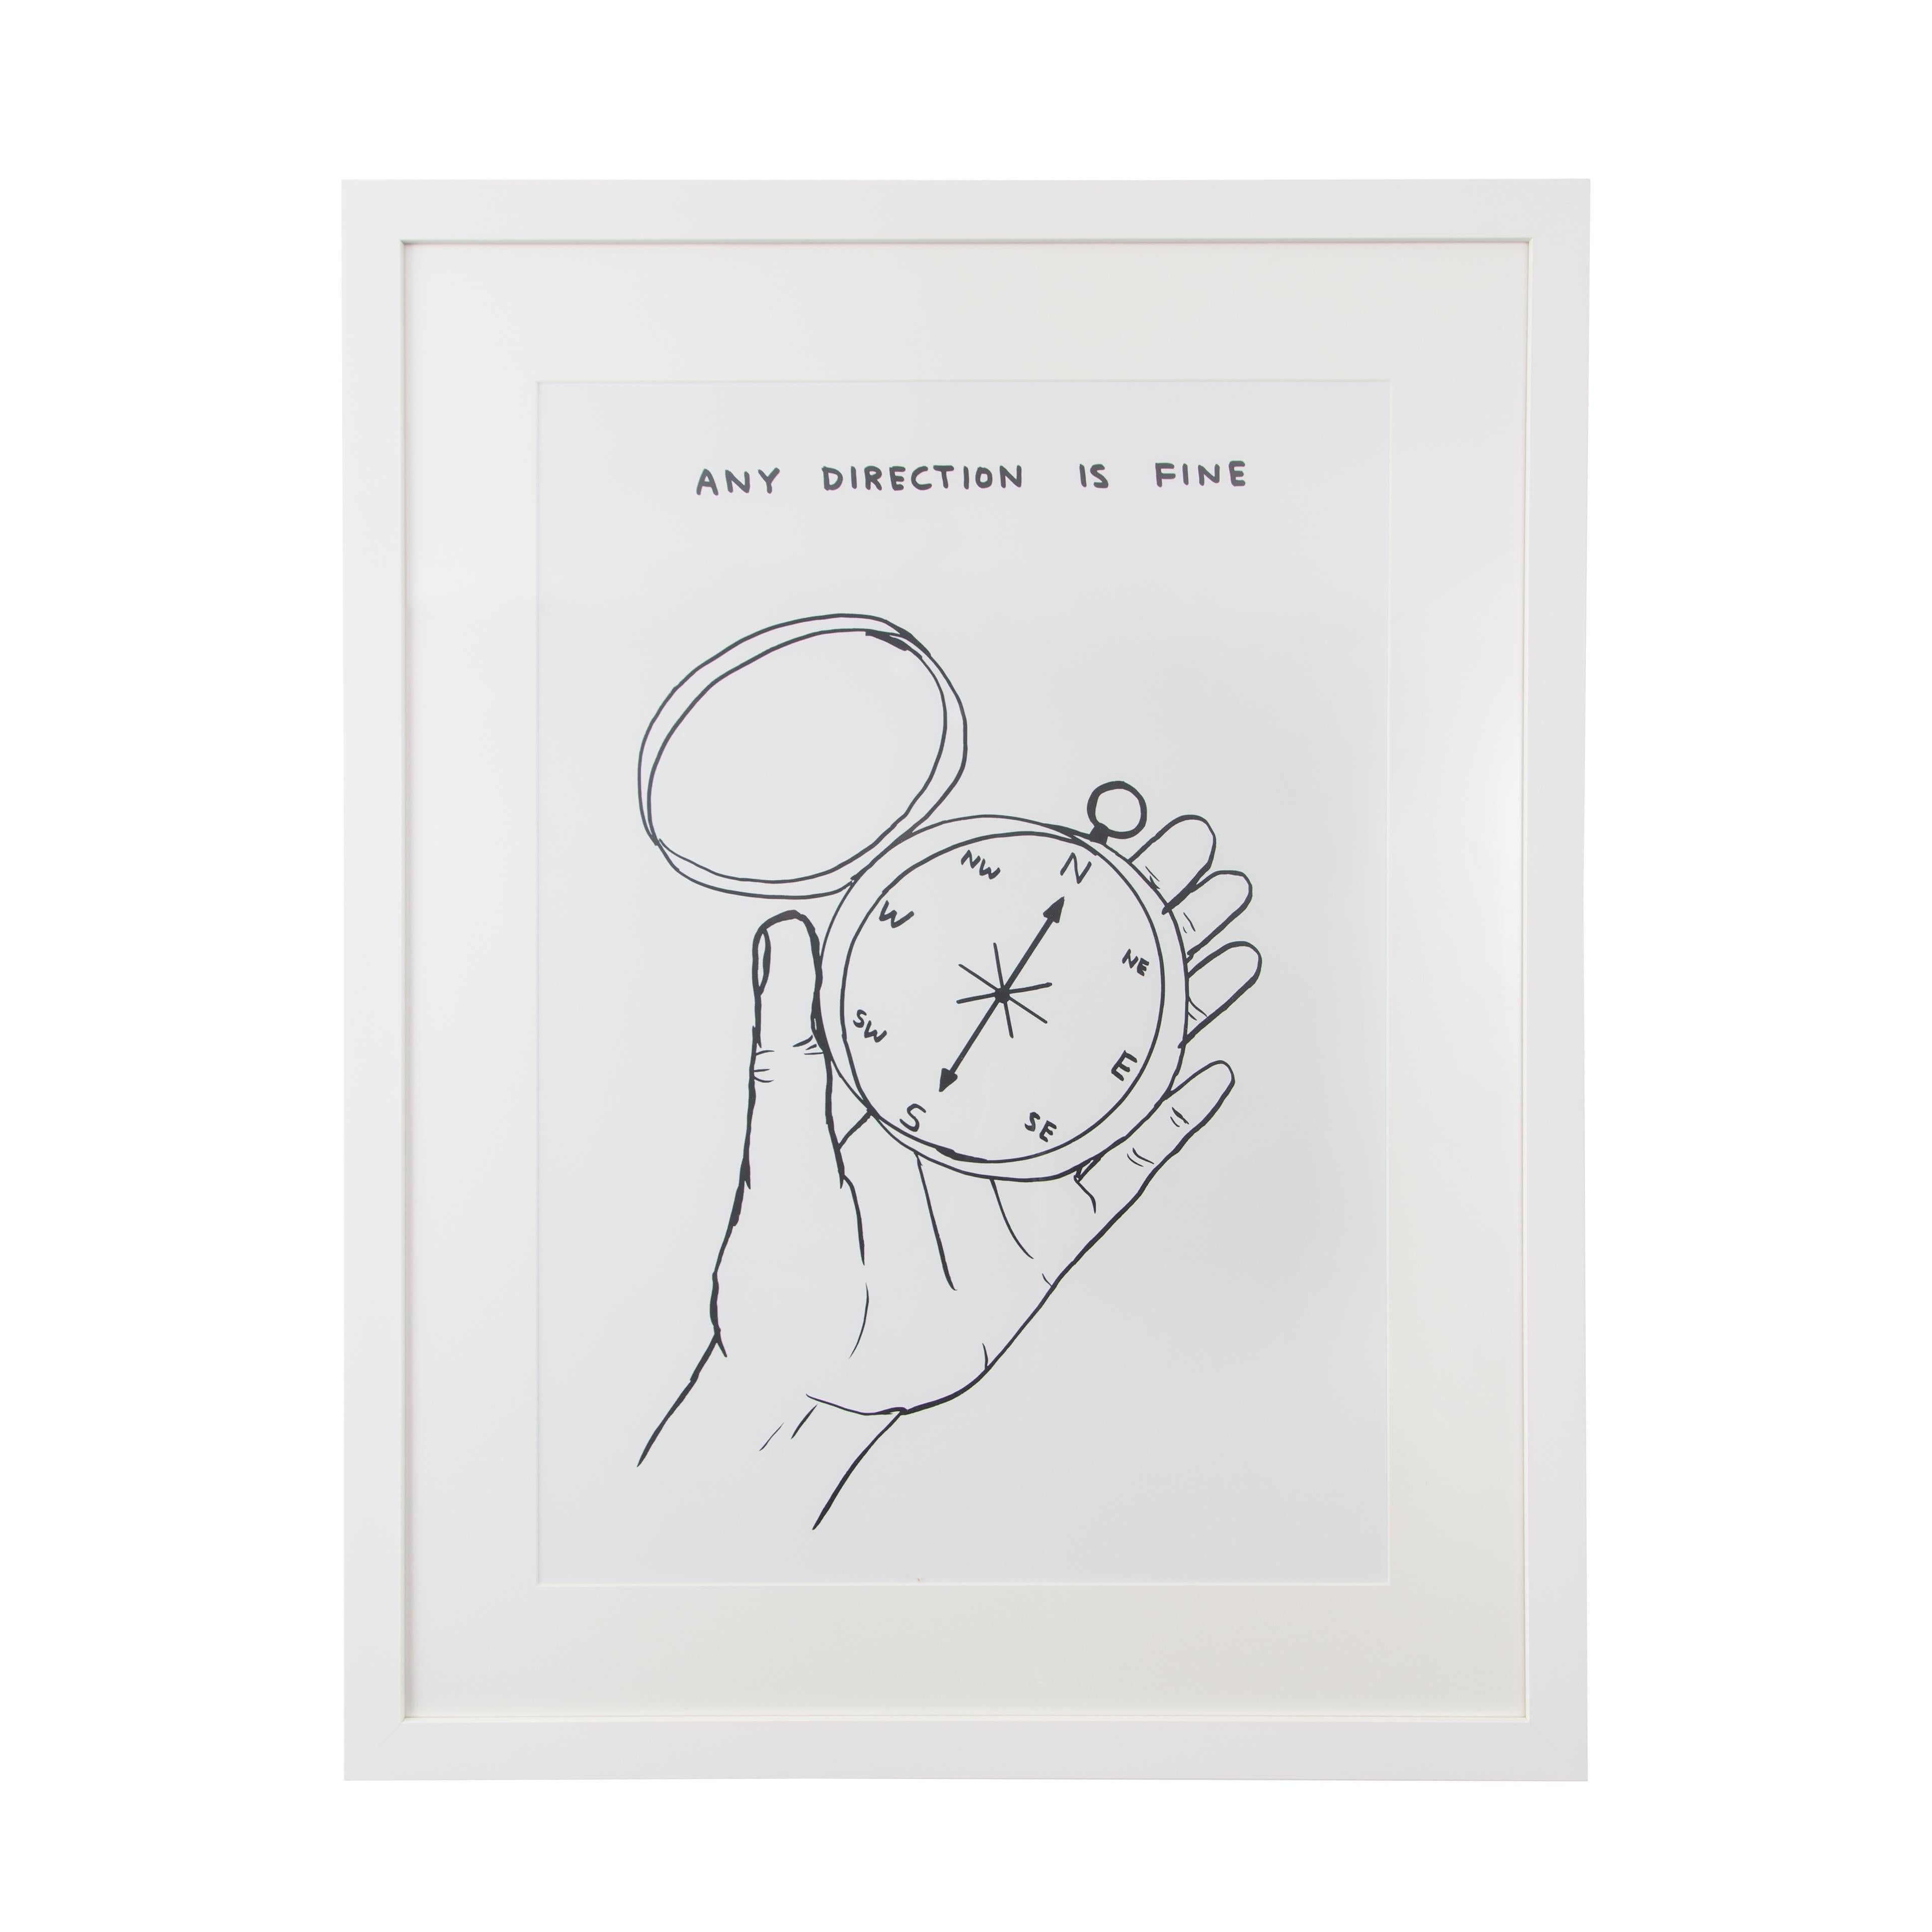 Any Direction Is Fine - Contemporary Print by David Shrigley